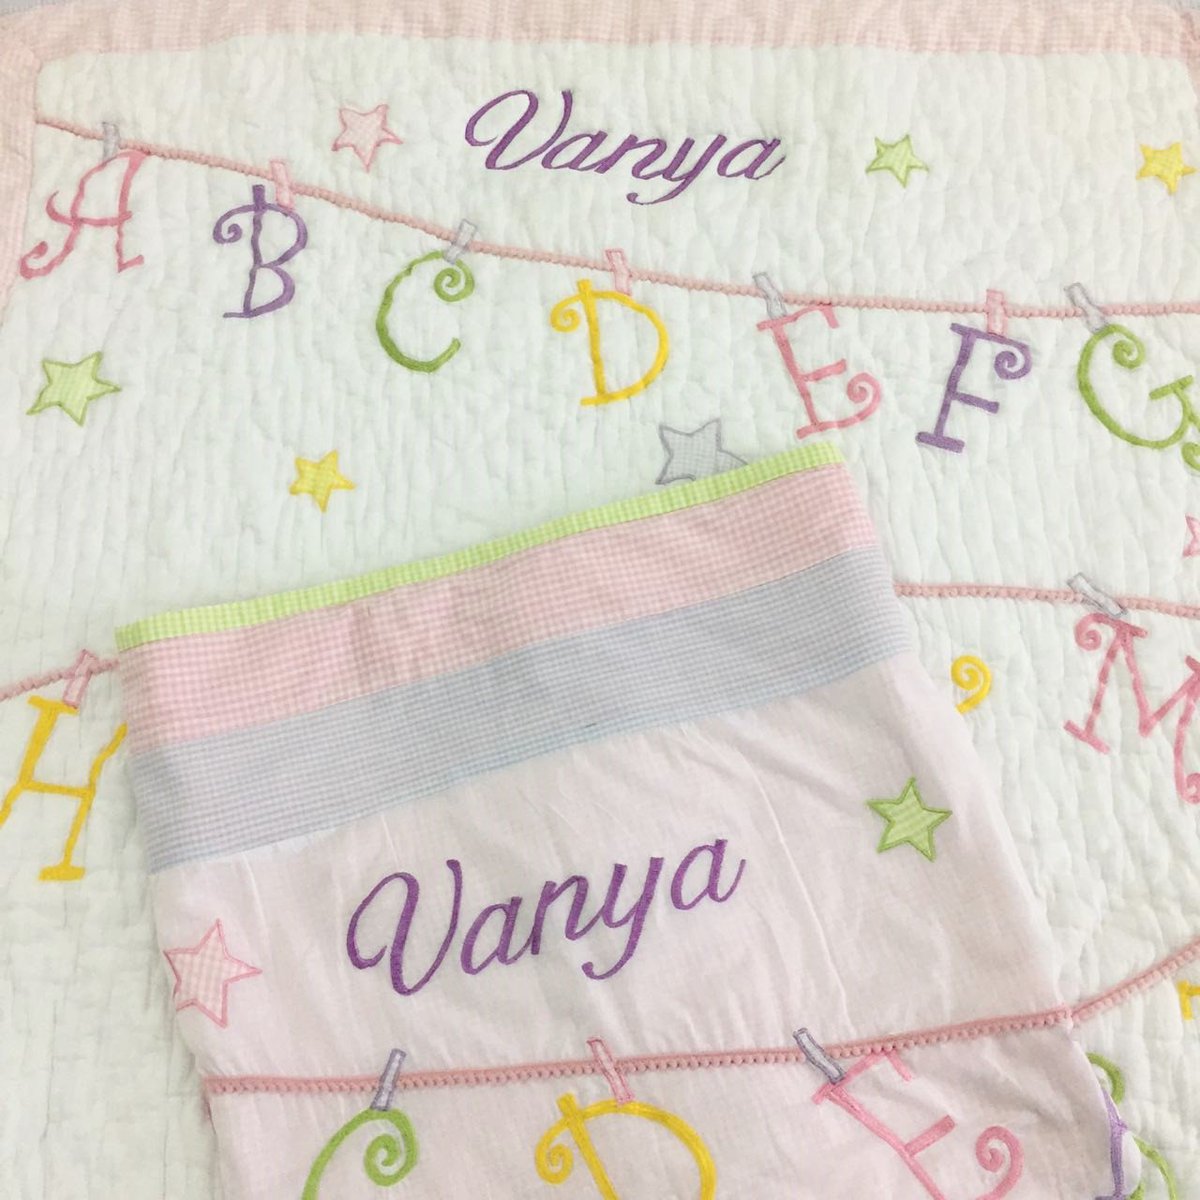 Pretty bedding with your name on it! #GiftsToLove #PersonalizedQuilt #Coverlet

Shop Now I know My ABCs bedding collection: littleweststreet.com/now-i-know-my-…